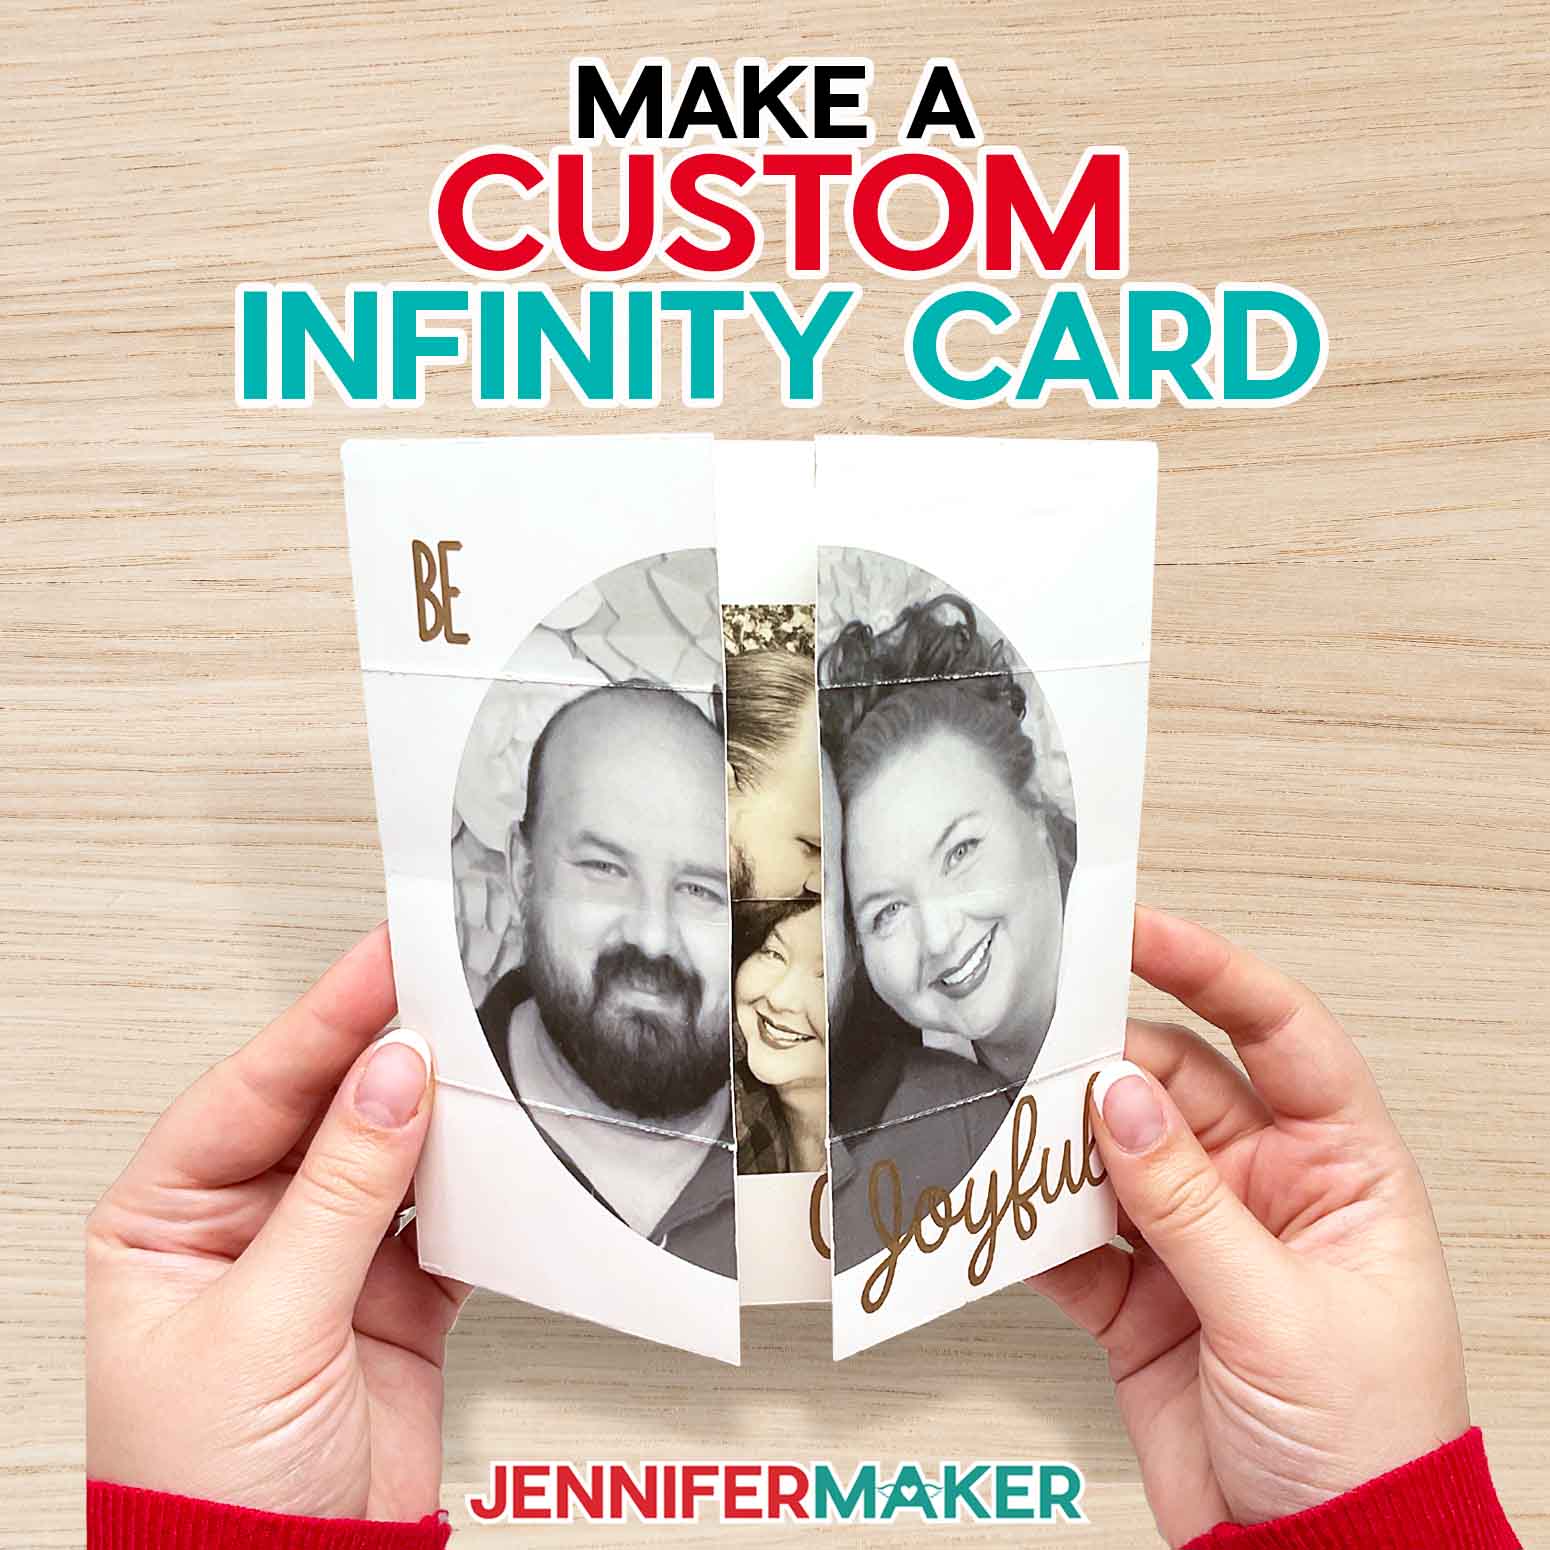 Make a custom infinity card with JenniferMaker's tutorial! Jennifer holding an infinity card with a photo of her and Greg on the front, with the sentiment "Be Joyful" written in copper pen. The card is partially open in the middle, revealing a peek at another photo of the happy couple!